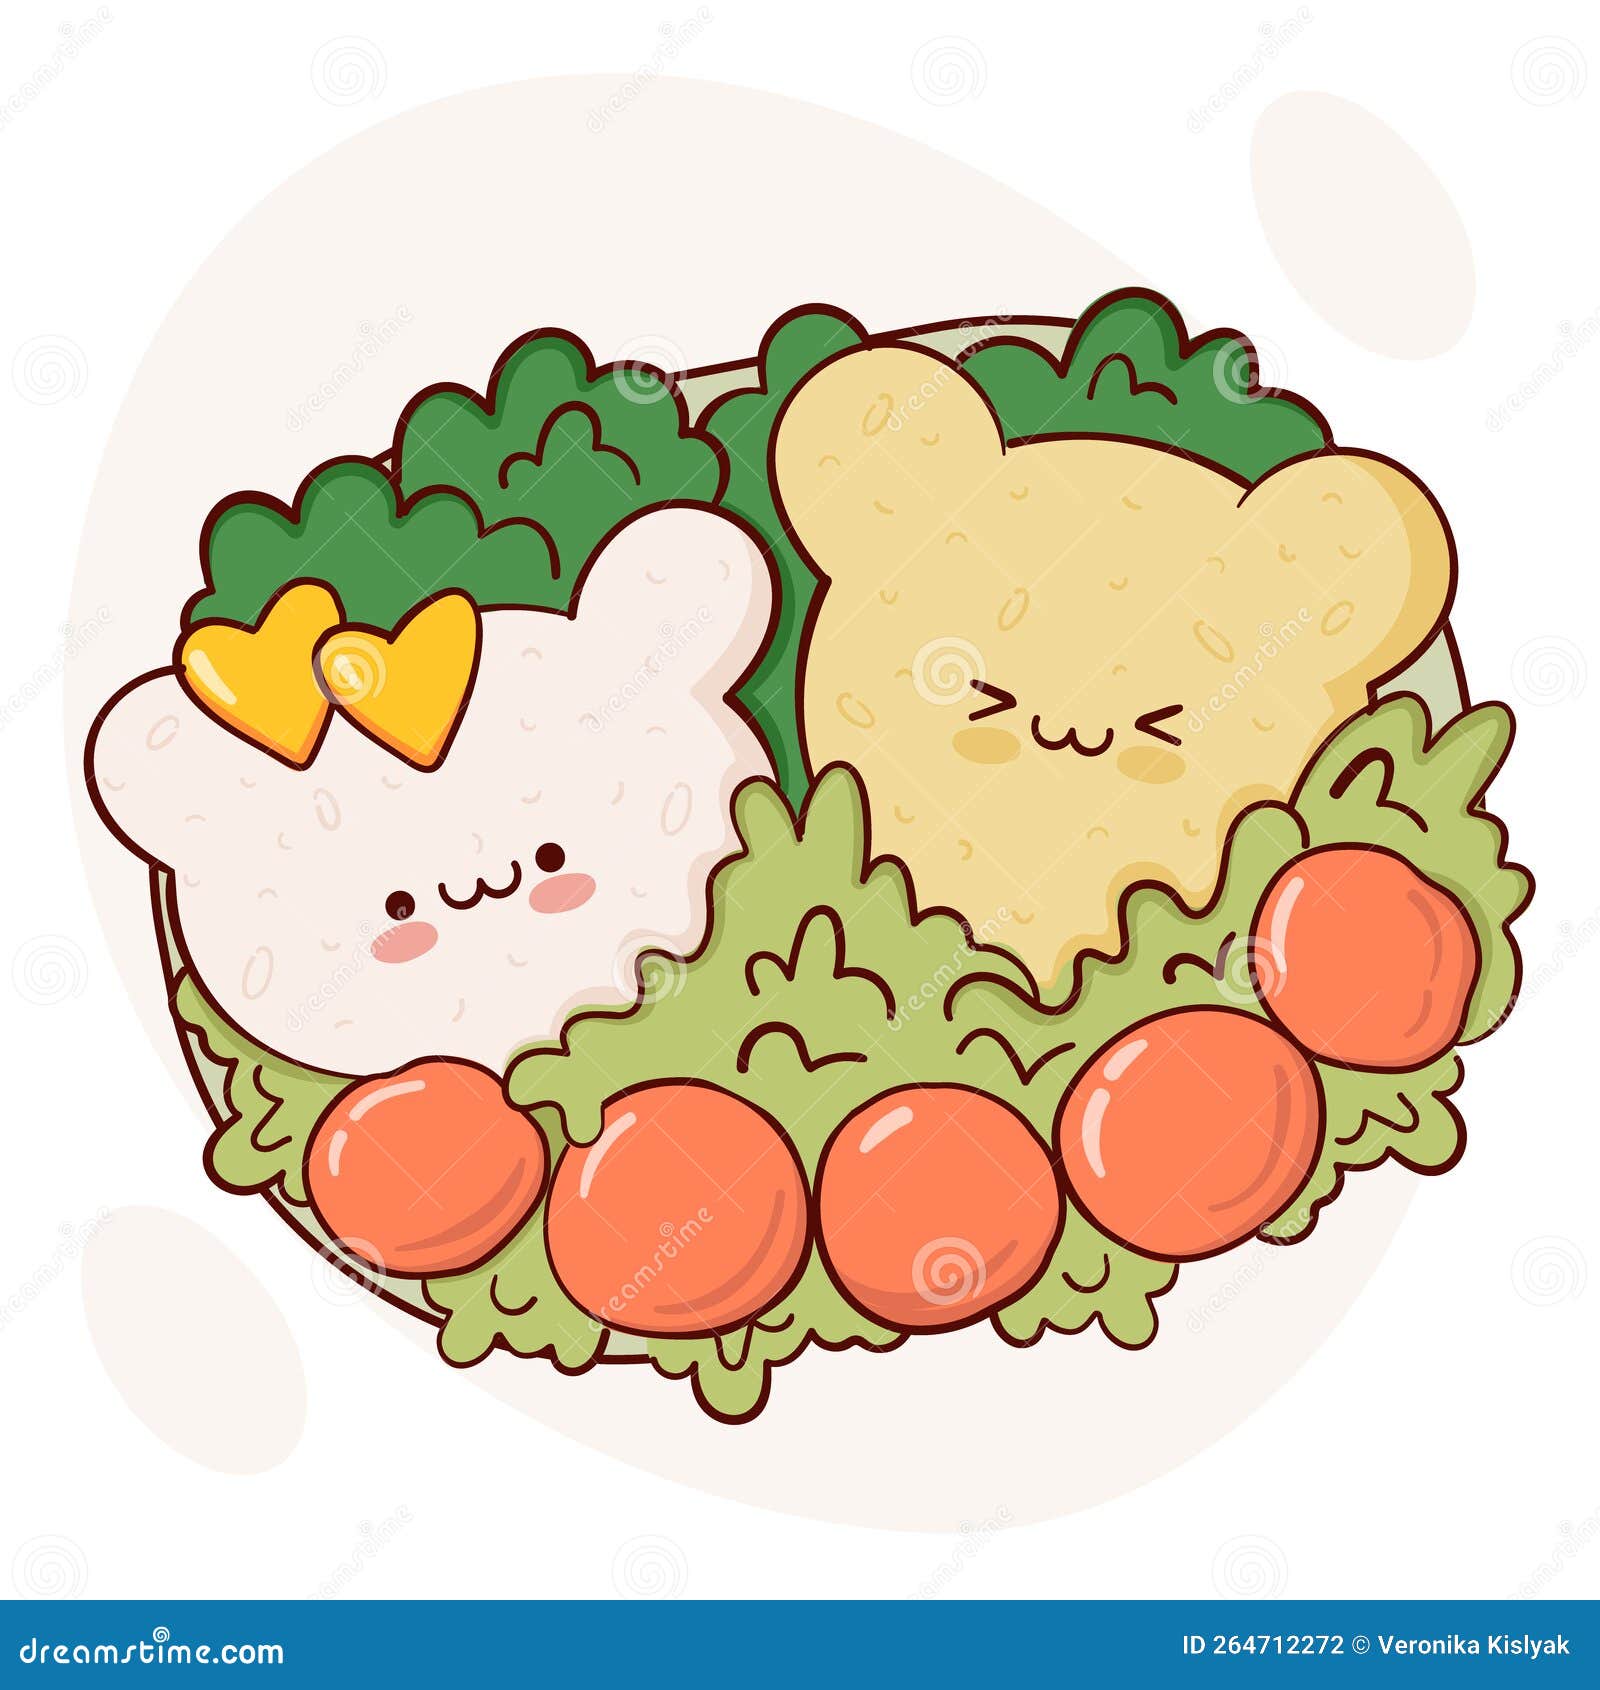 https://thumbs.dreamstime.com/z/draw-funny-kawaii-bento-box-home-cooking-takeaway-meal-prep-vector-illustration-japanese-asian-traditional-food-menu-concept-264712272.jpg